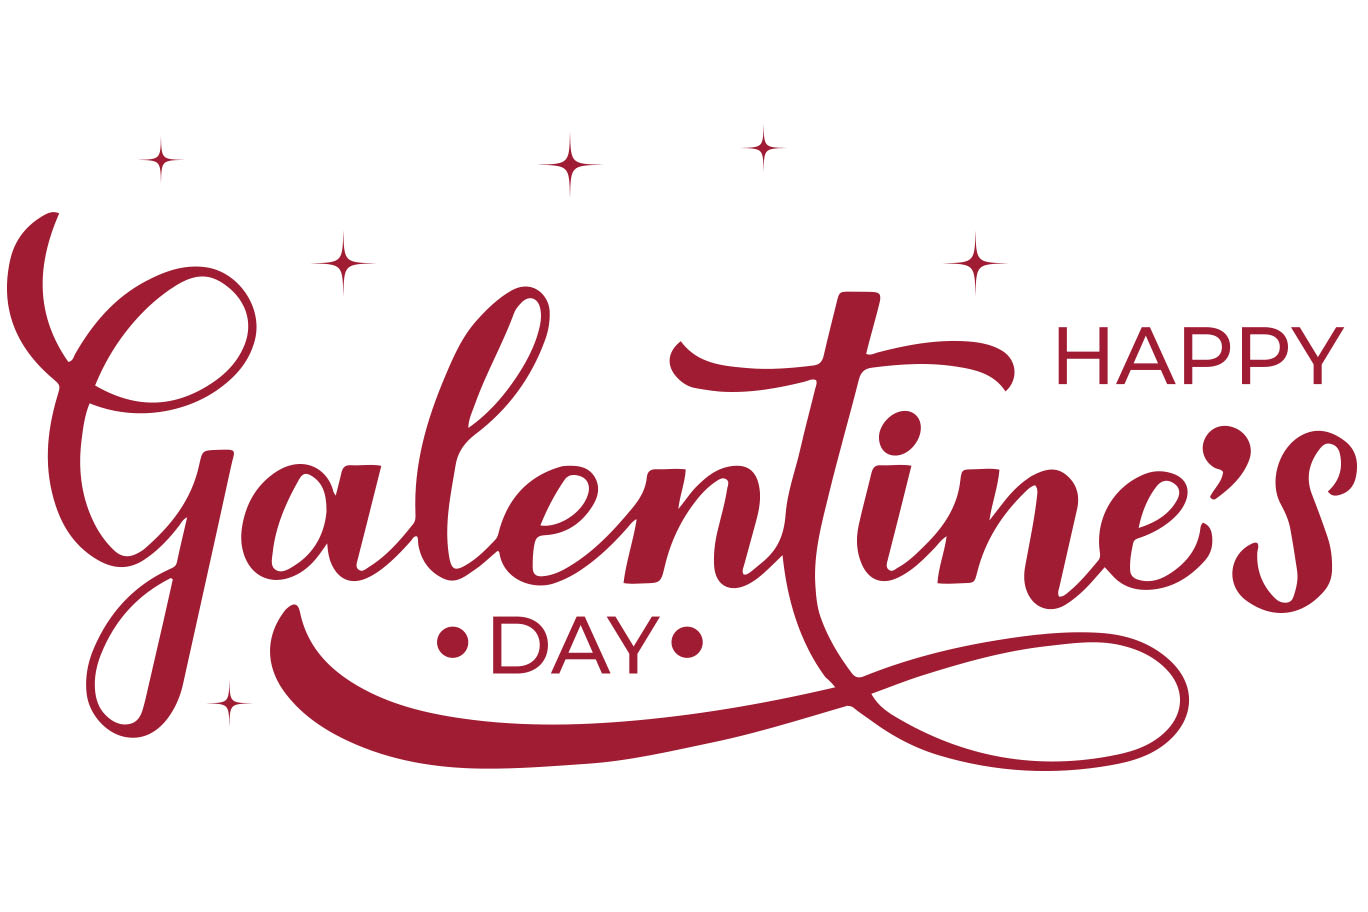 Happy Galentine’s Day – 7 Tips to Celebrate the Women in Your Life